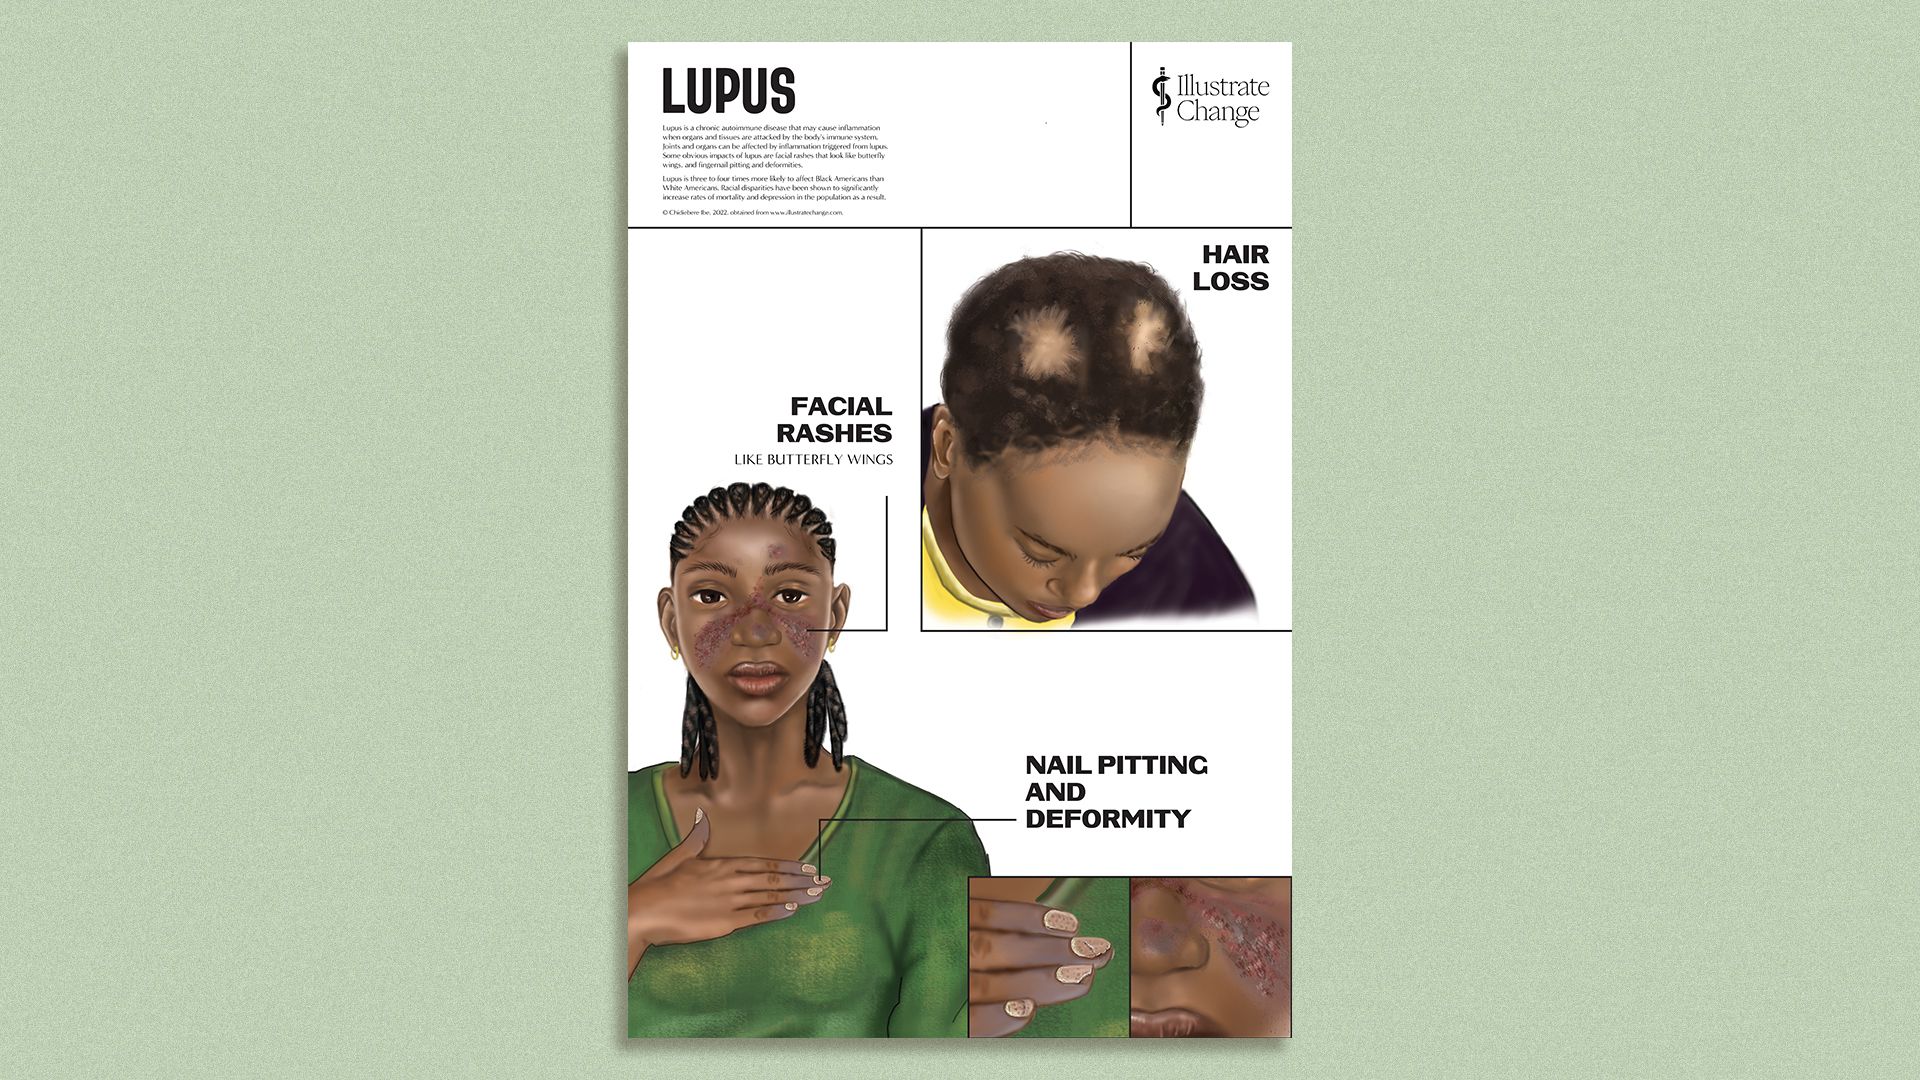 A medical illustration of a Black young girl with Lupus. She has a rash on her face and two bald spots on her head. She is wearing a green shirt and has her hand on her chest. 